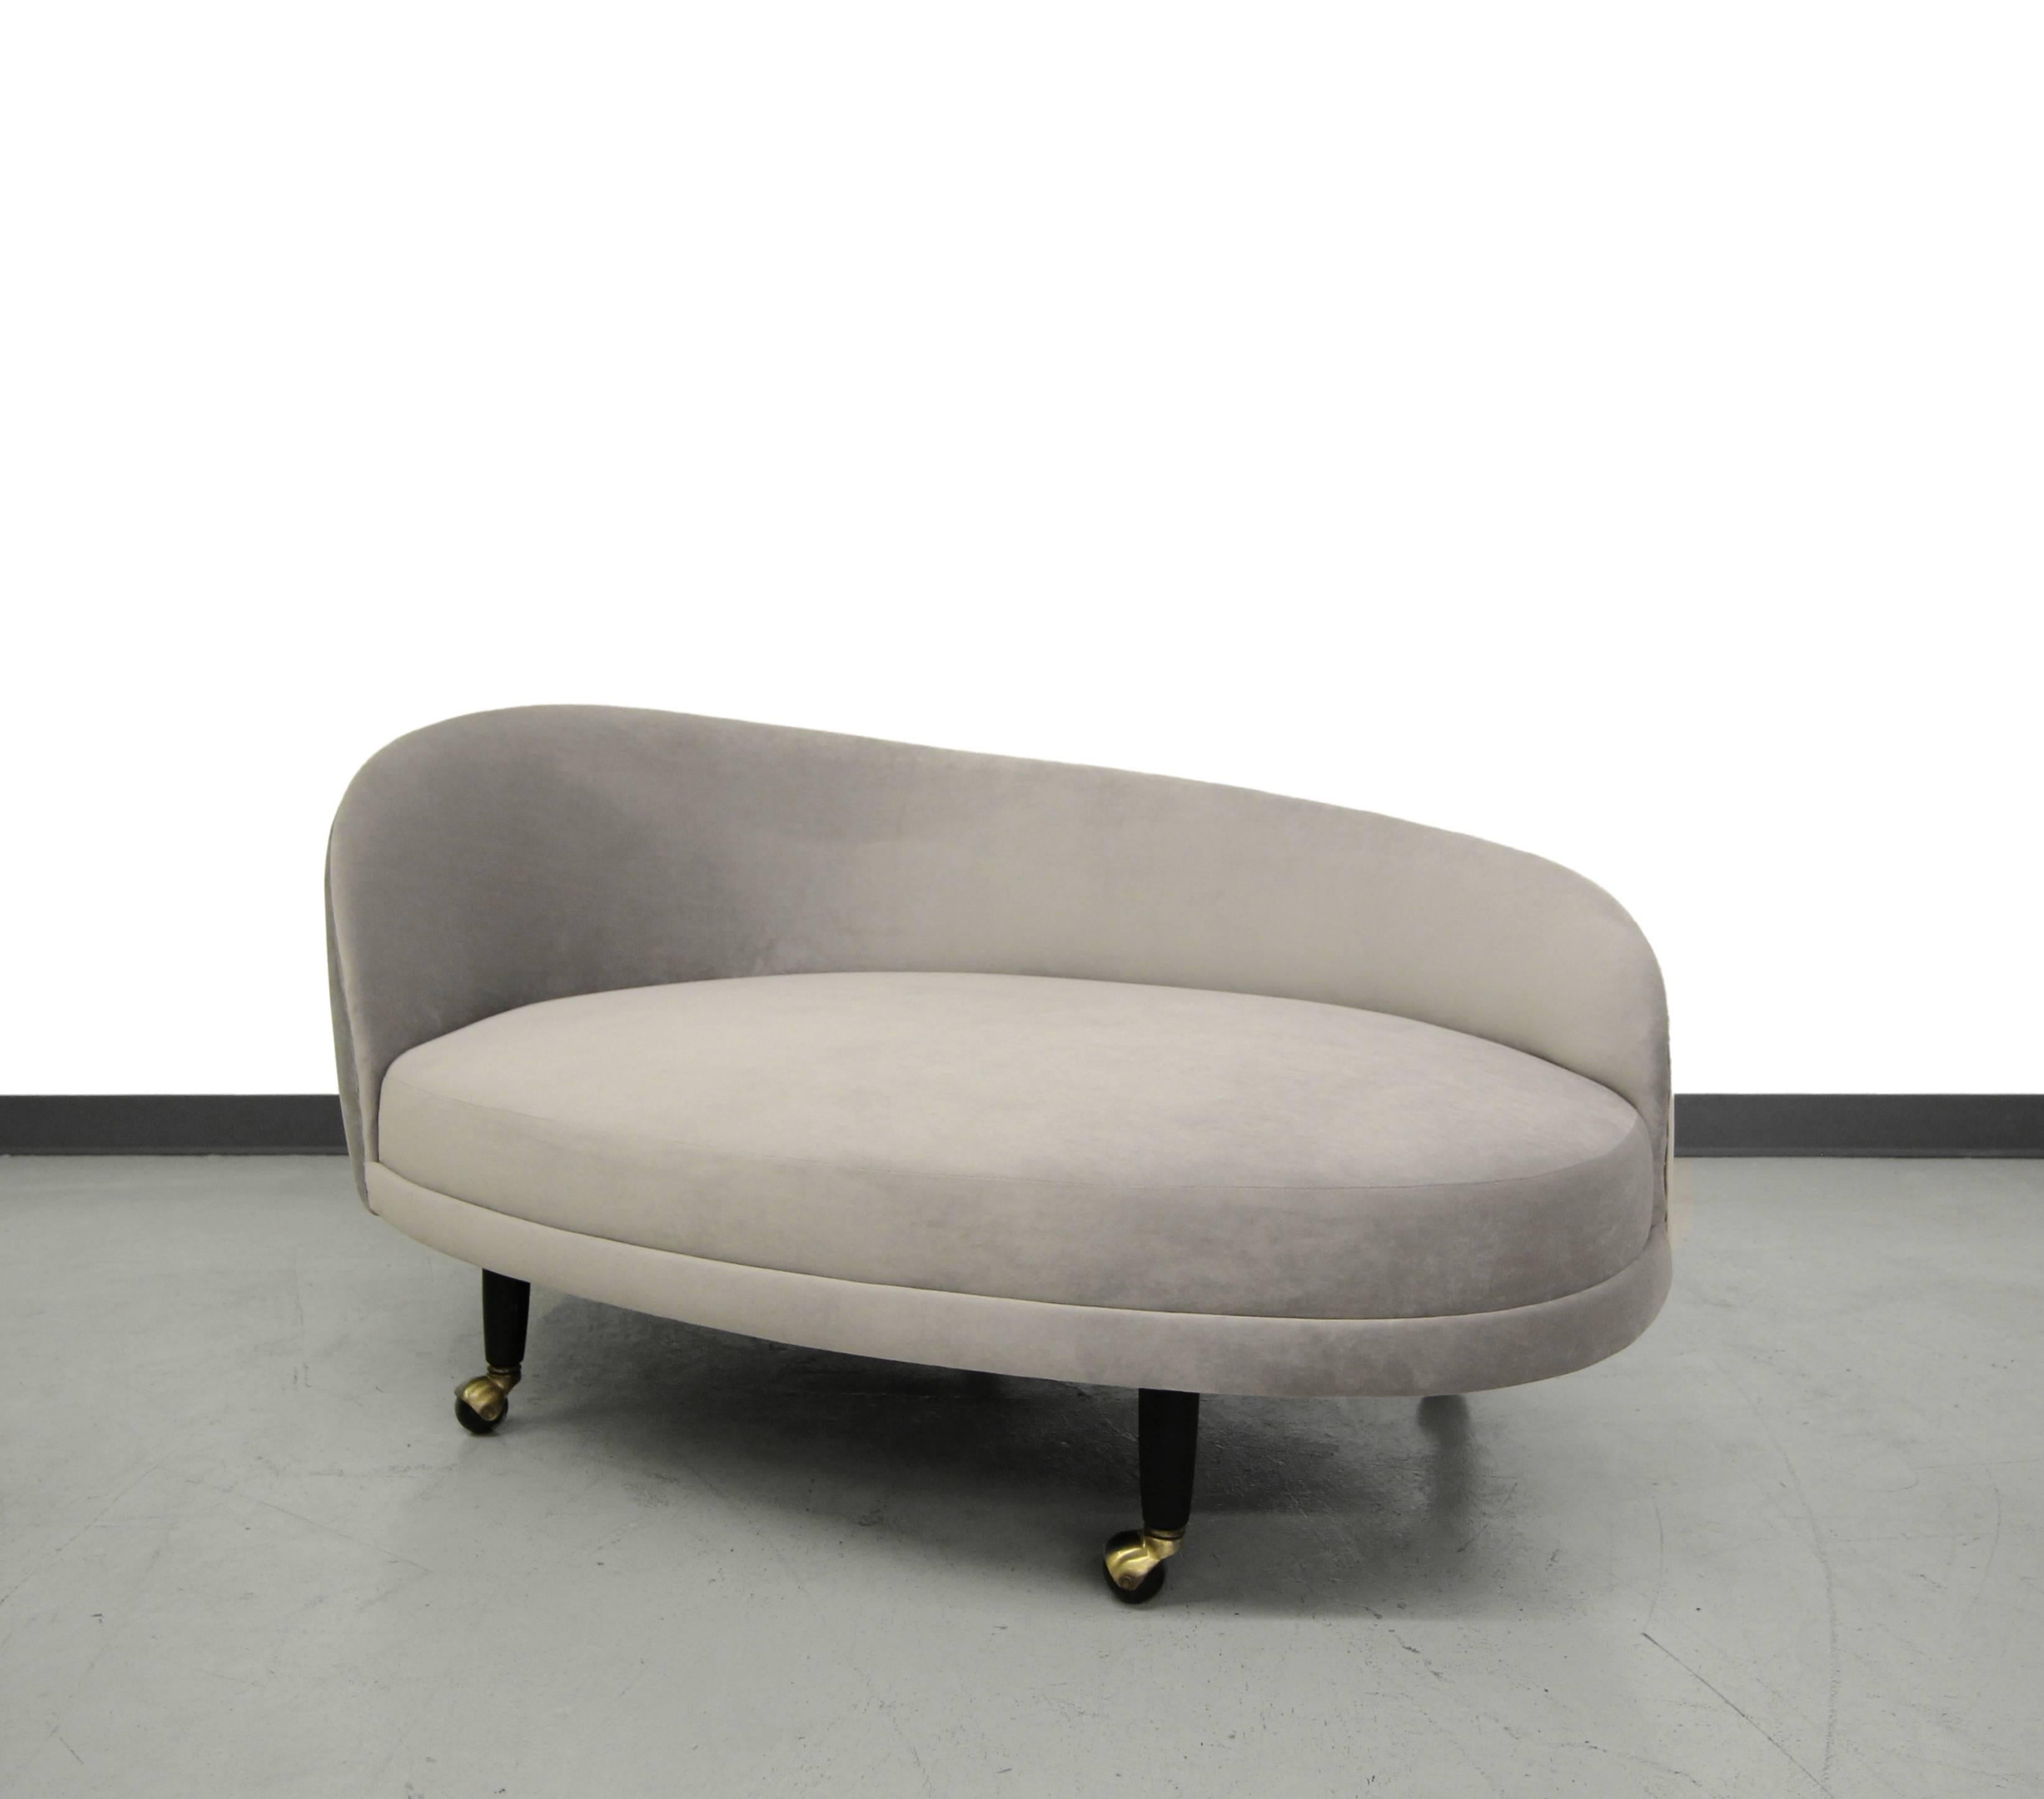 Adrian Pearsall chaise longue model 2026 CL. Form at its finest. This piece is a design masterpiece. Professionally reupholstered and ready for it's new home.